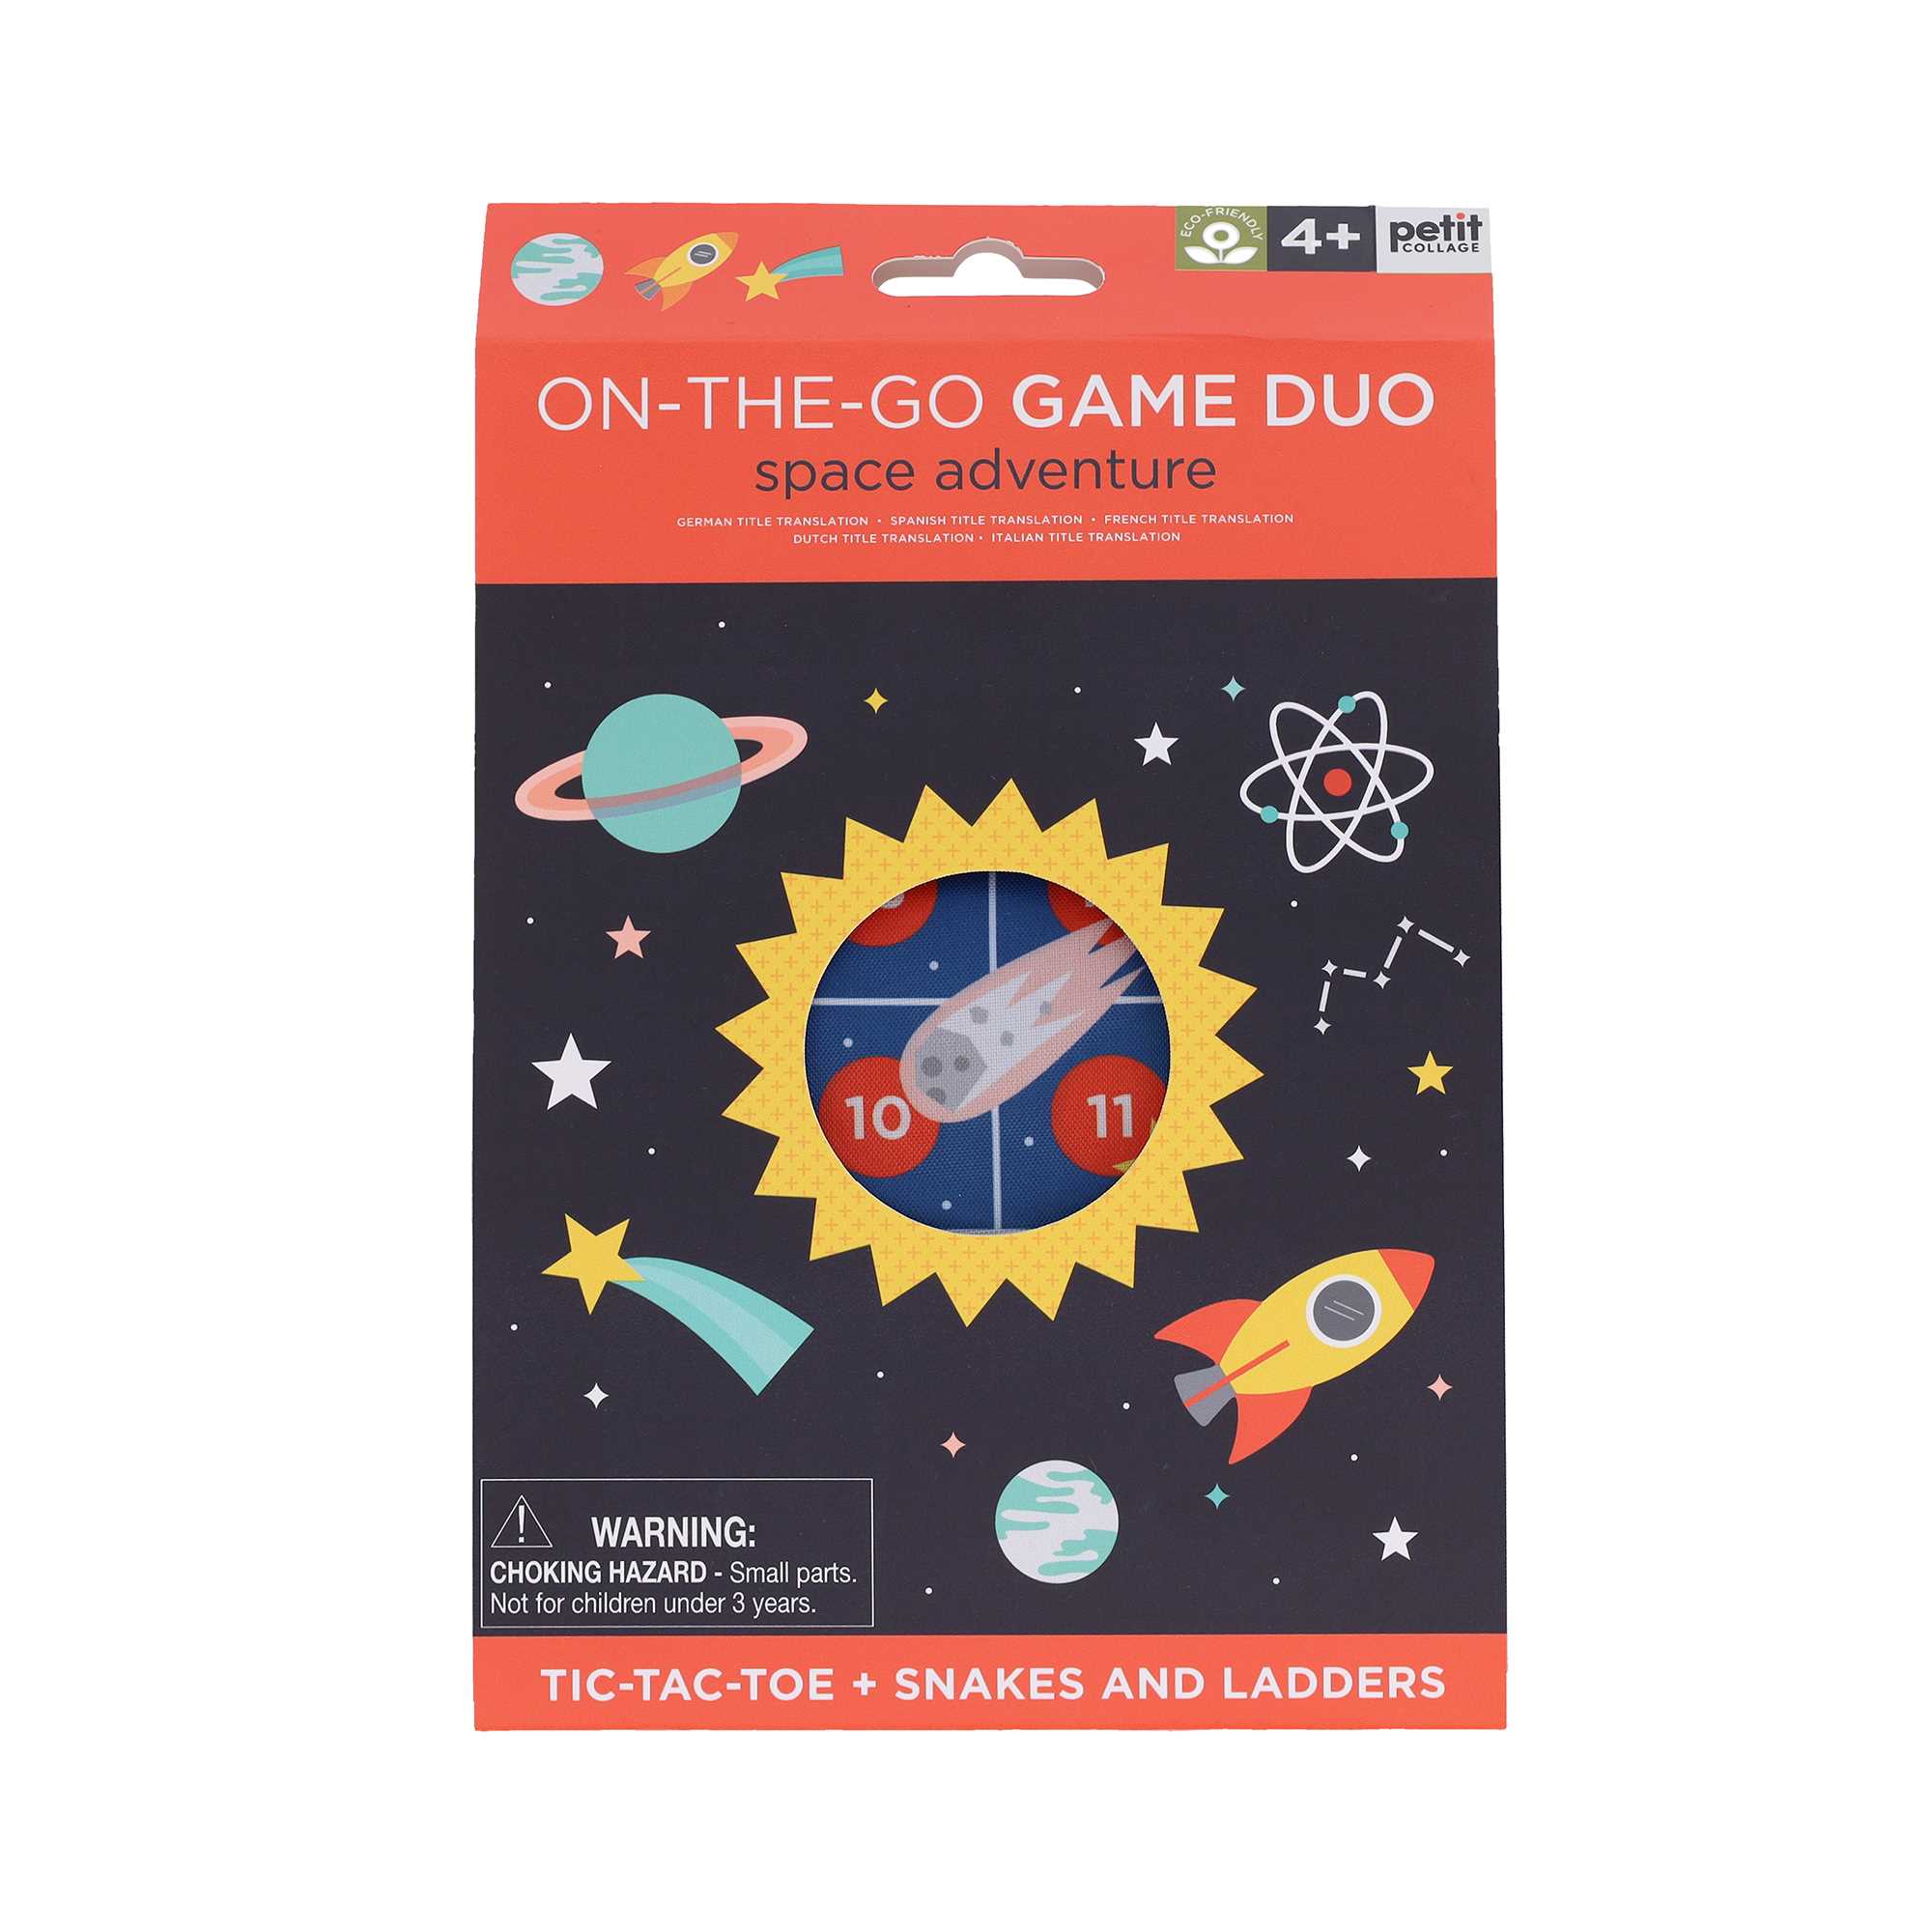 Space Adventure (On-the-Go Game Duo)